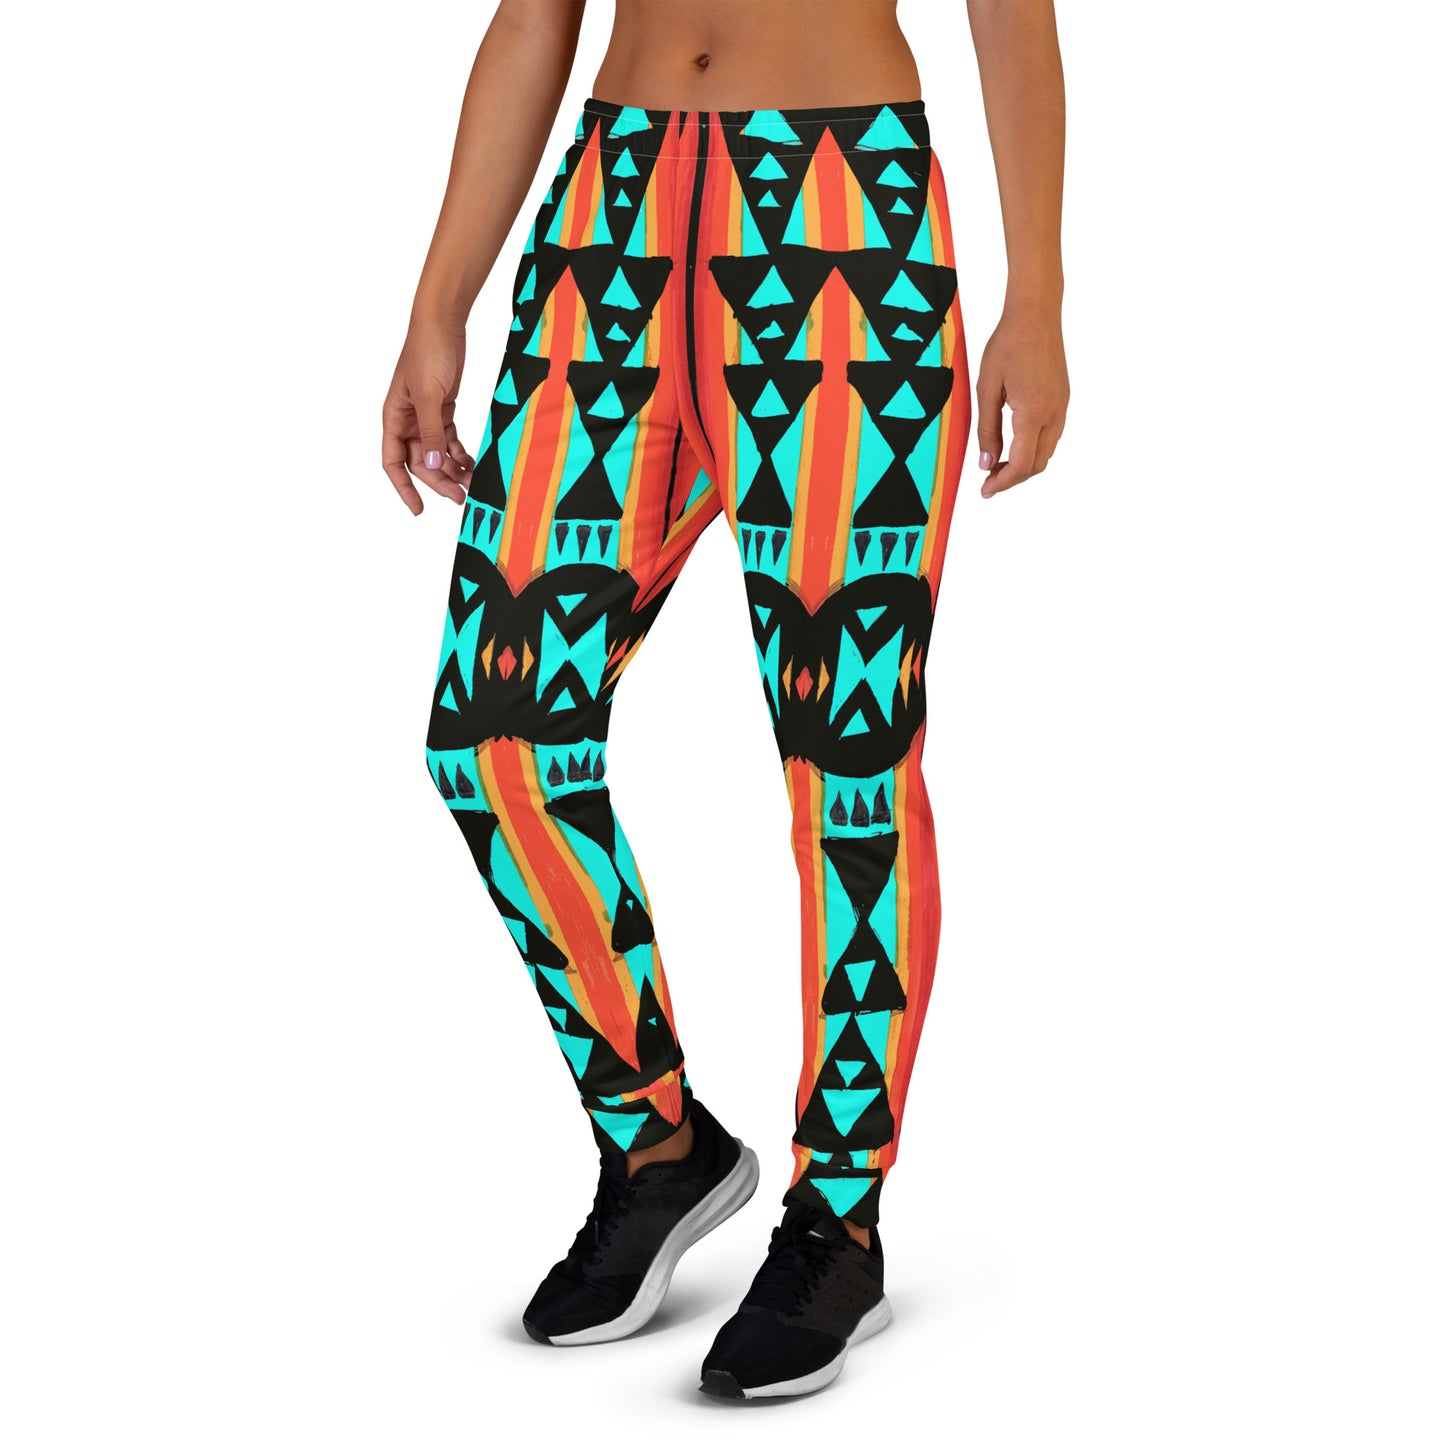 KYEH! Turquoise Women's Joggers